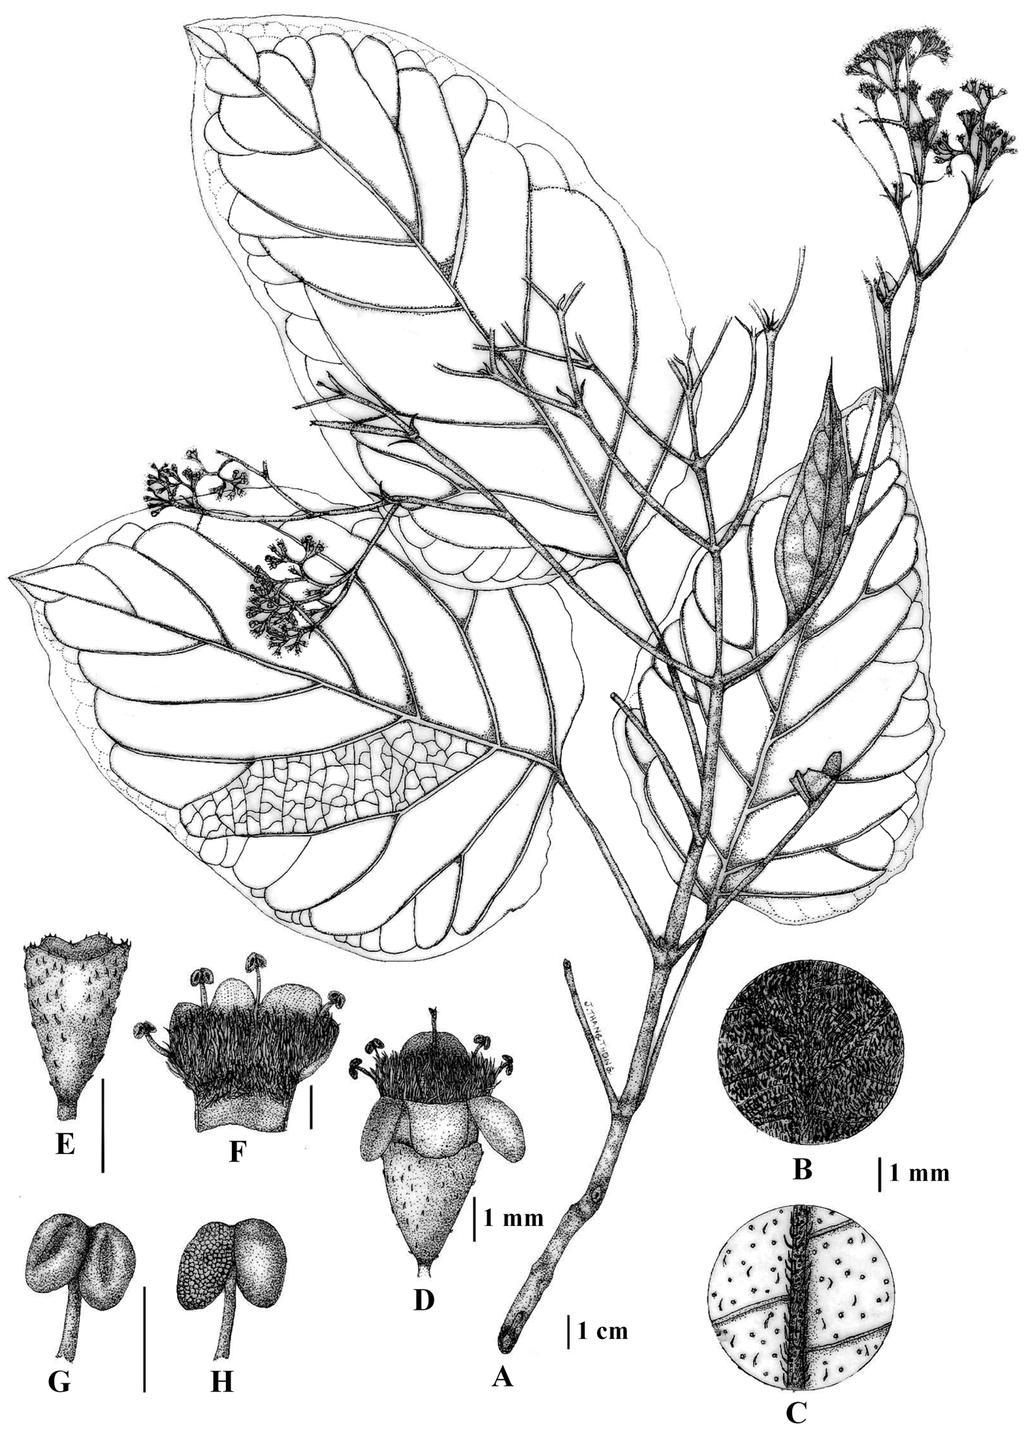 10 NAT. HIST. J. CHULALONGKORN UNIV. 8(1), MAY 2008 FIGURE 2. Premna rabakensis: A. flowering branch; B. adaxial surface of leaf with densely pubescent hairs; C.